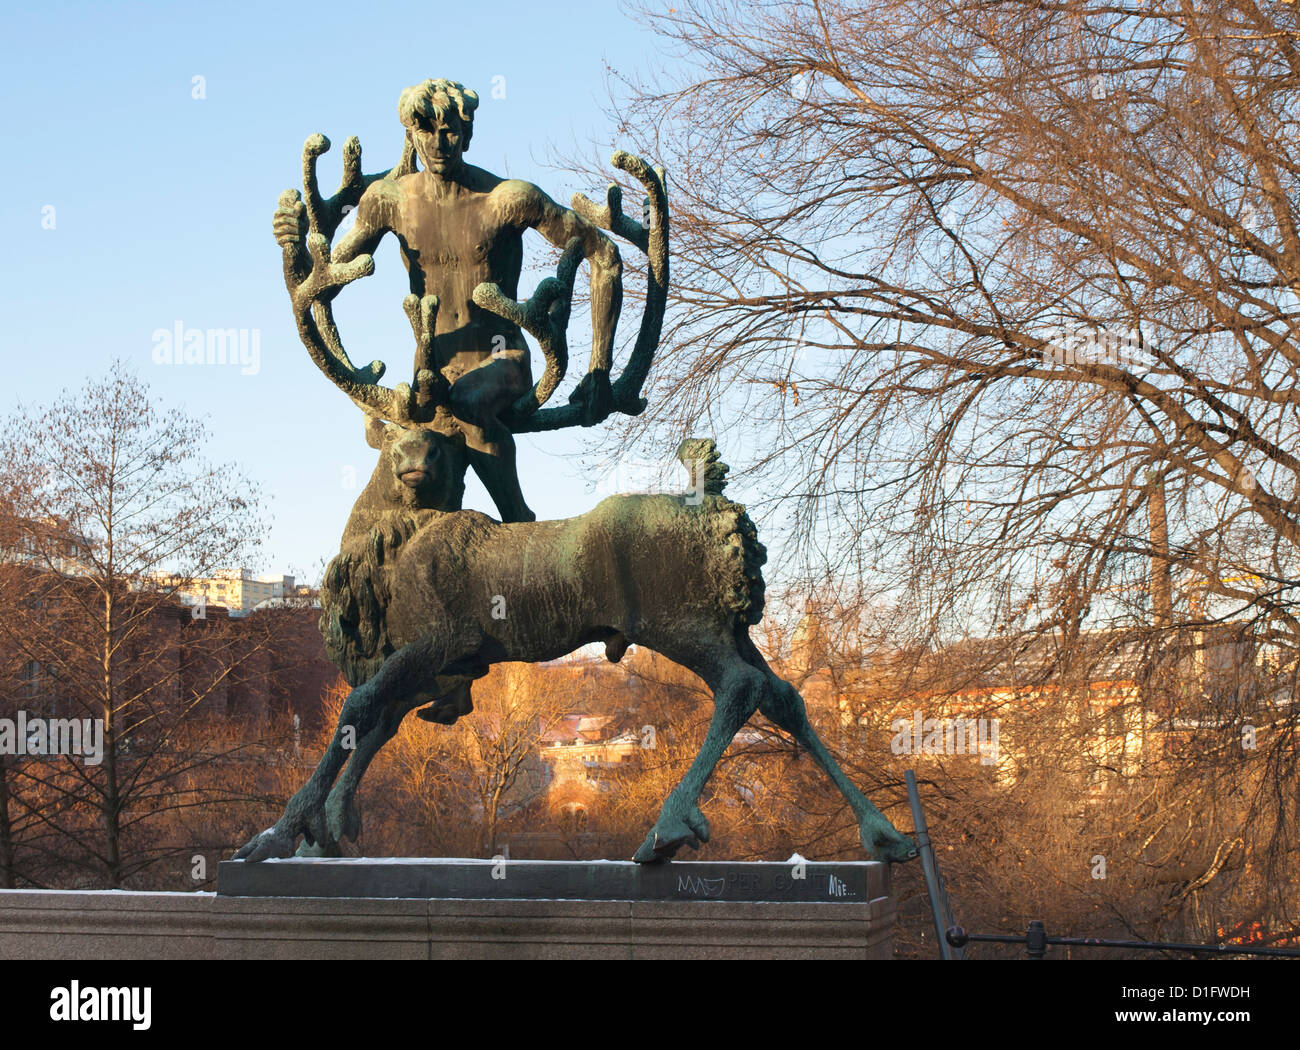 Sculpture depicting the character Peer Gynt riding a reindeer in the drama by Ibsen, placed in Oslo Norway Stock Photo